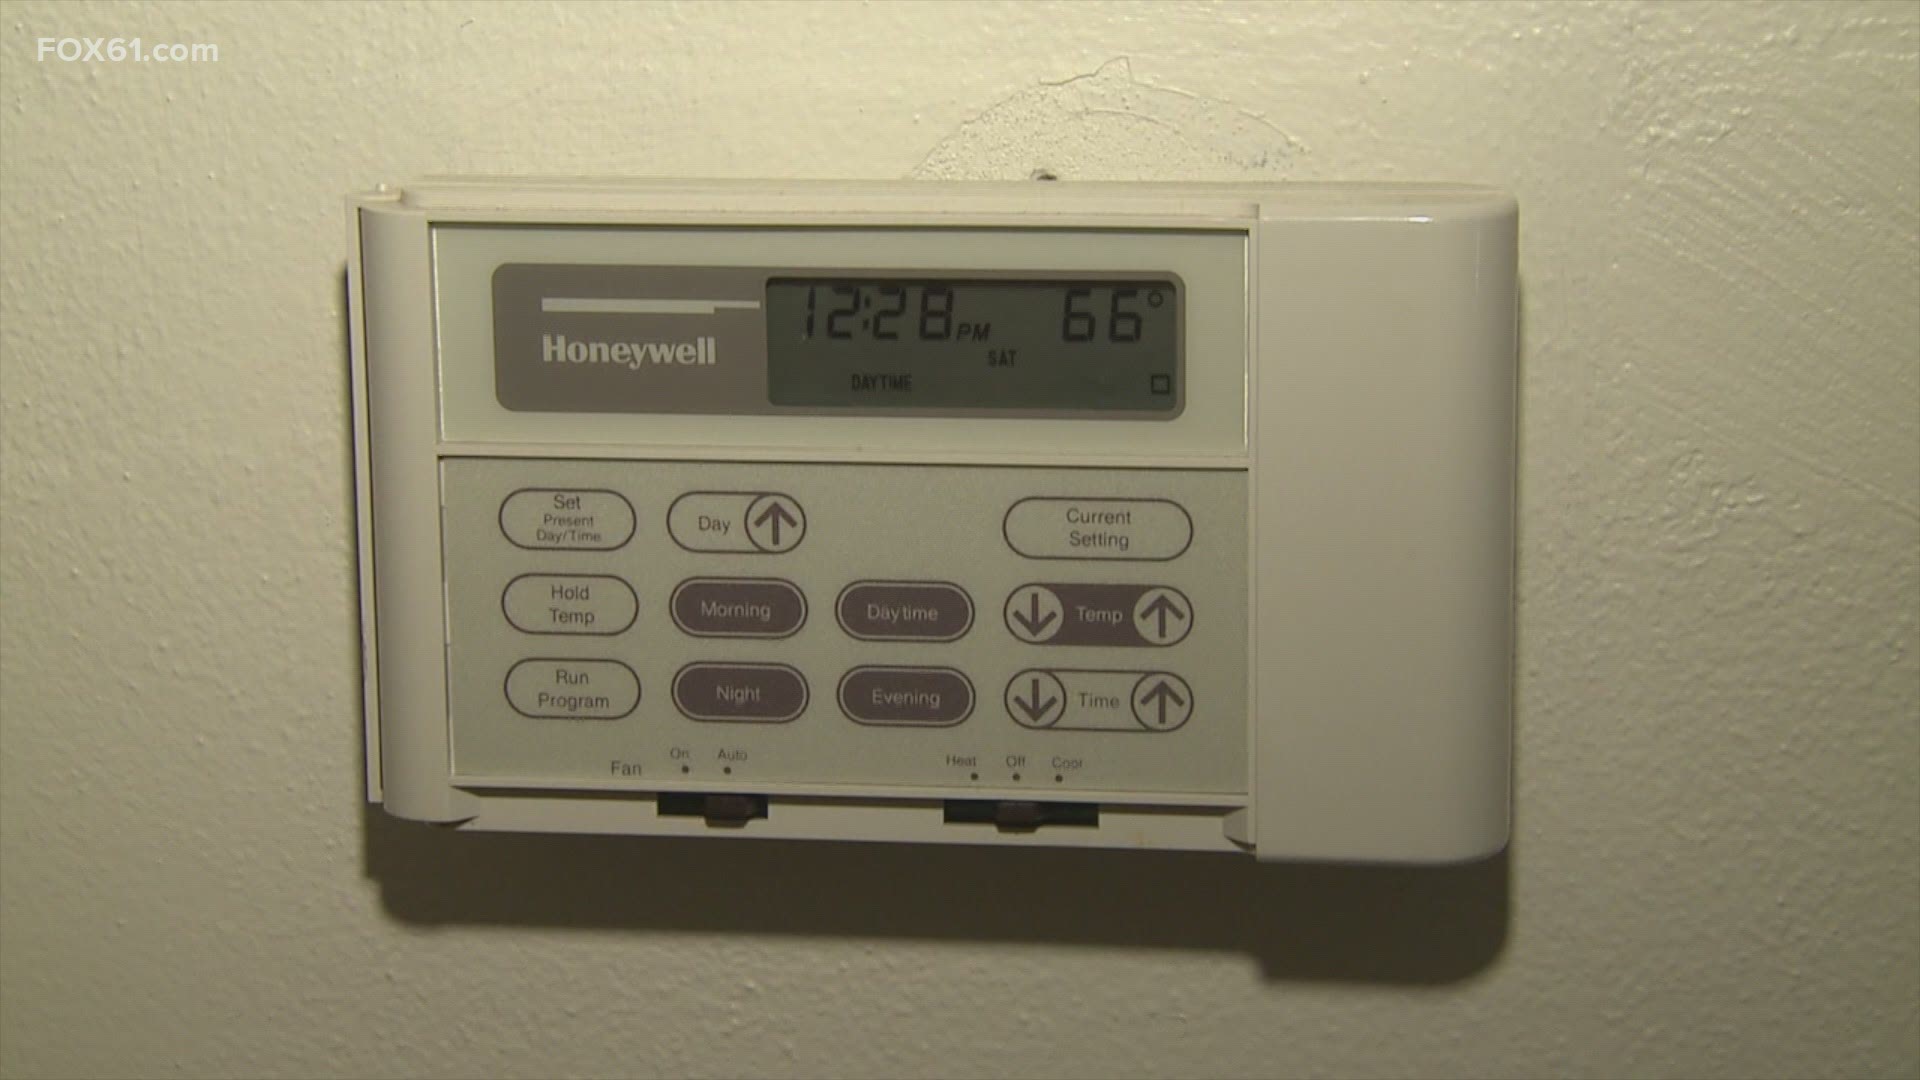 The FREE Connecticut Energy Assistance Program will help families across the state to pay for their home-heating bills this winter. Here are details of how to apply.